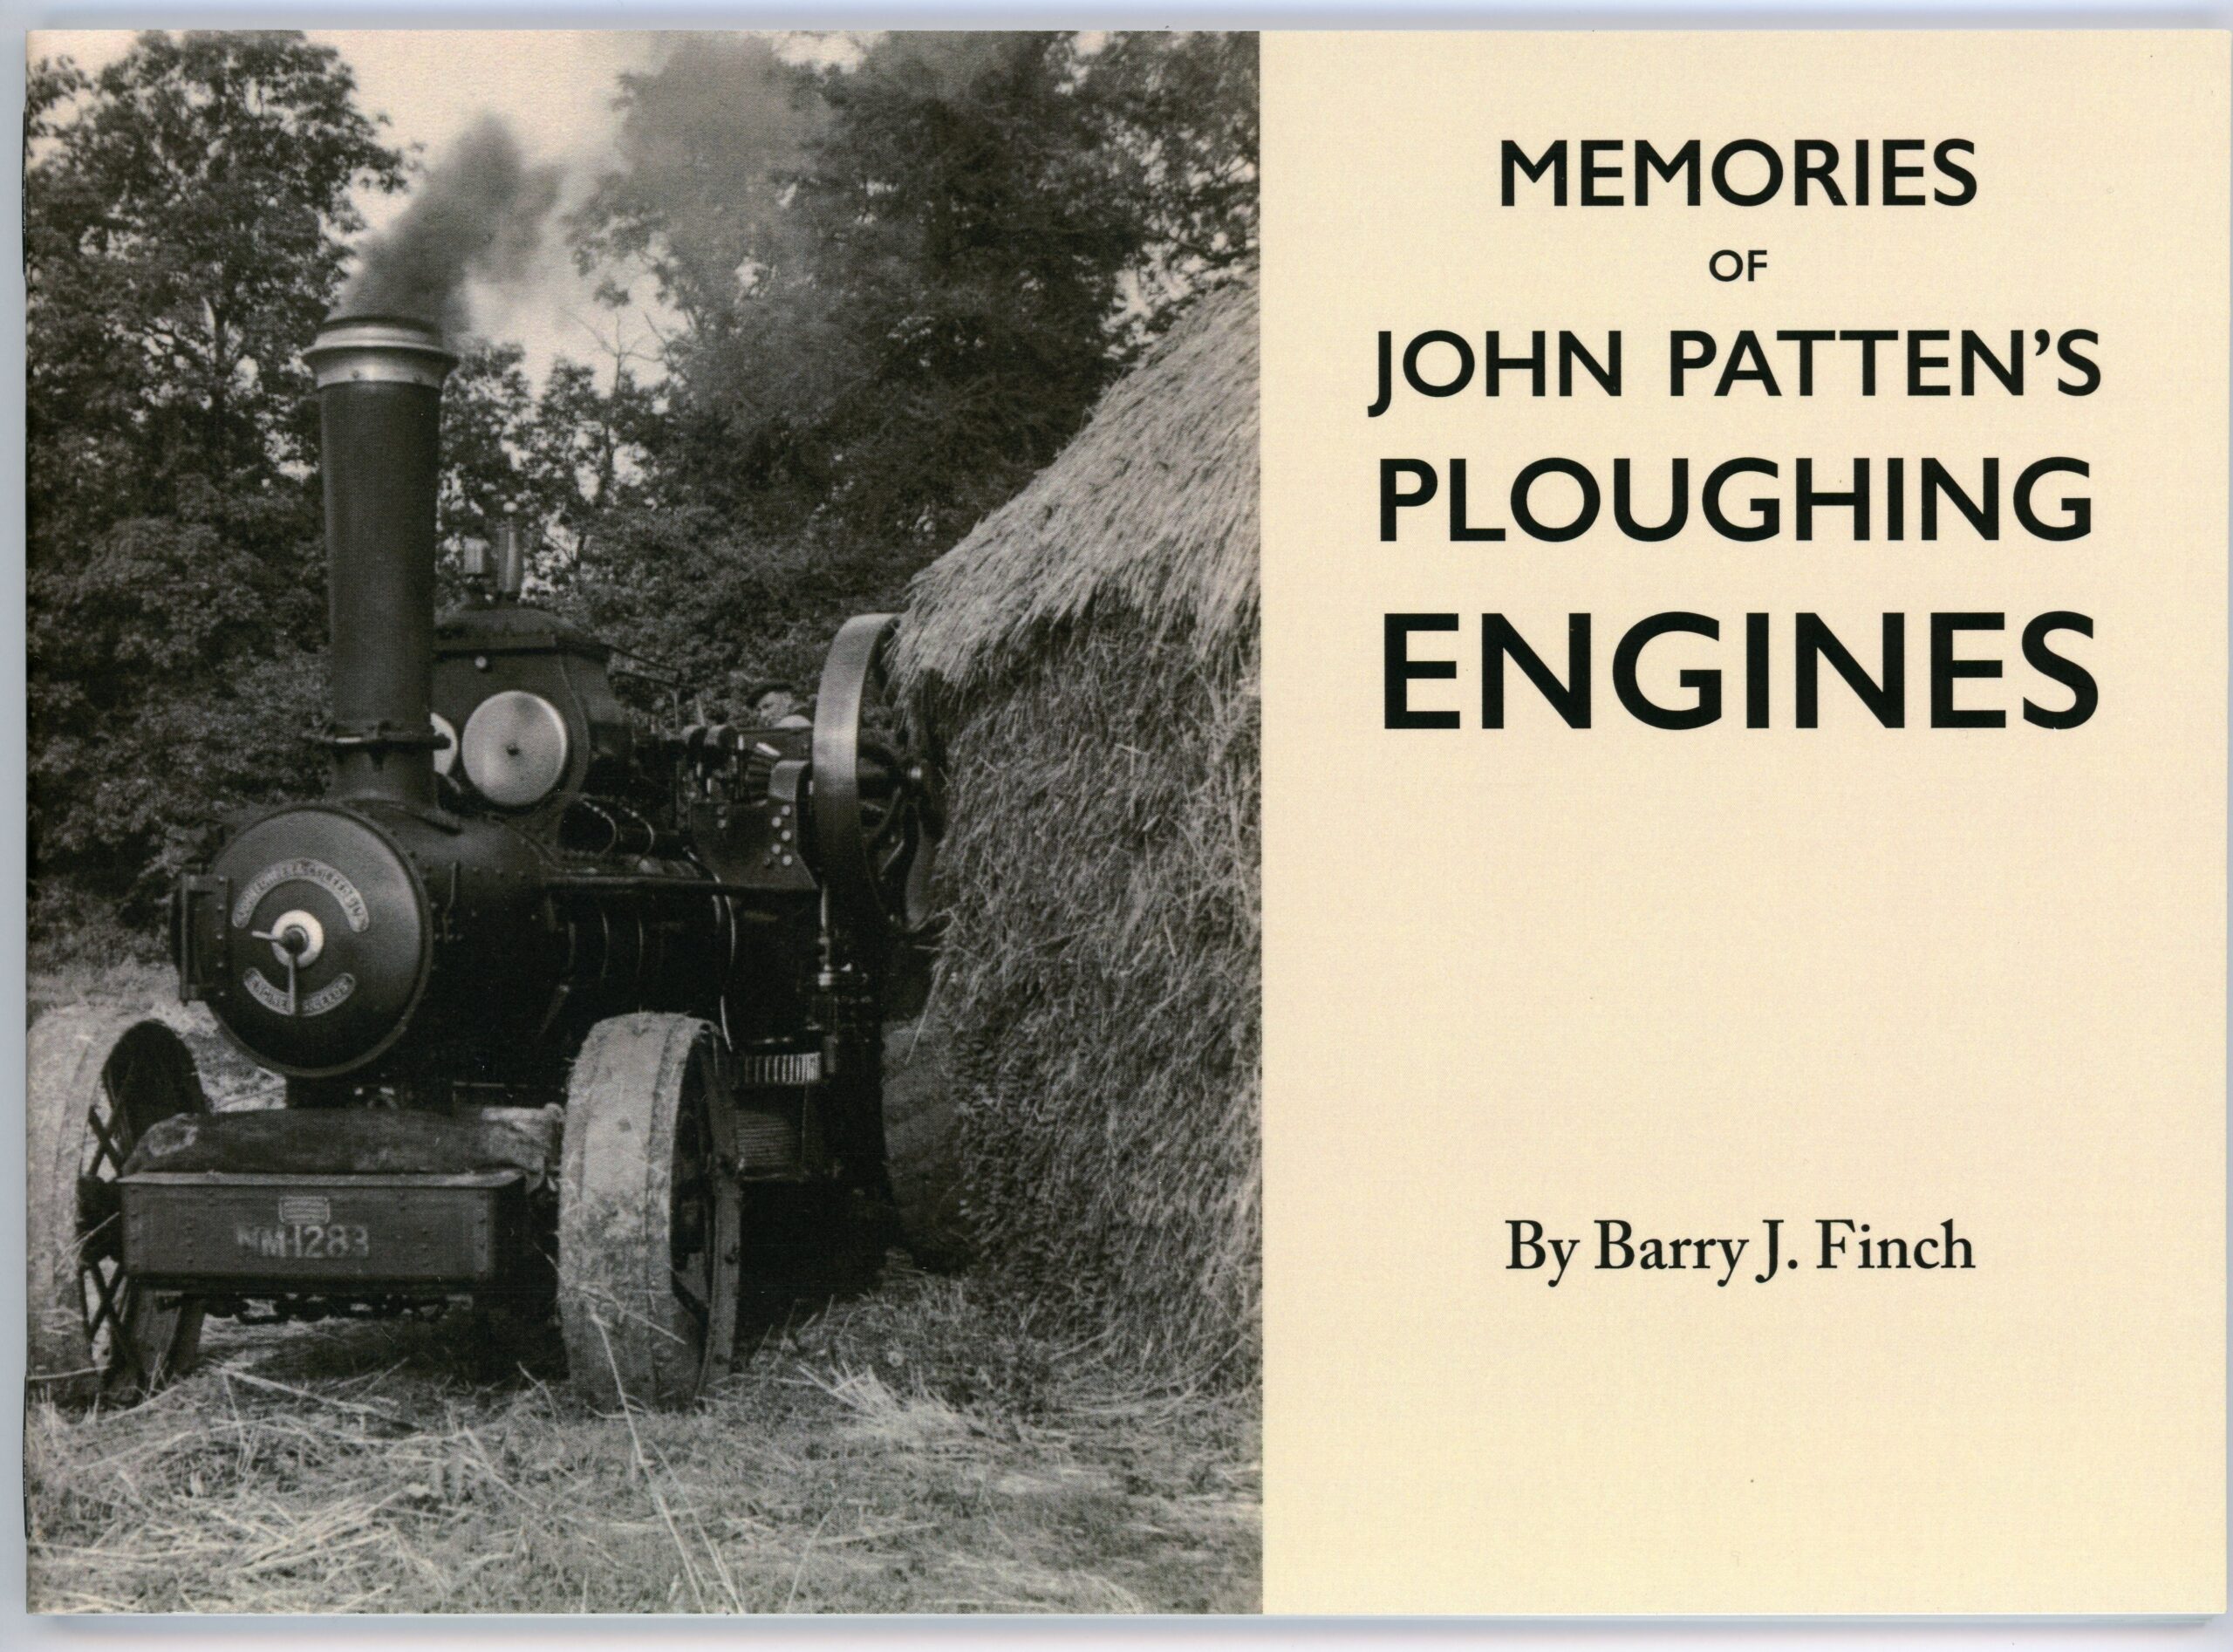 A review of Barry J. Finch’s publication “MEMORIES OF JOHN PATTEN’S PLOUGHING ENGINES” by James Hodgson.